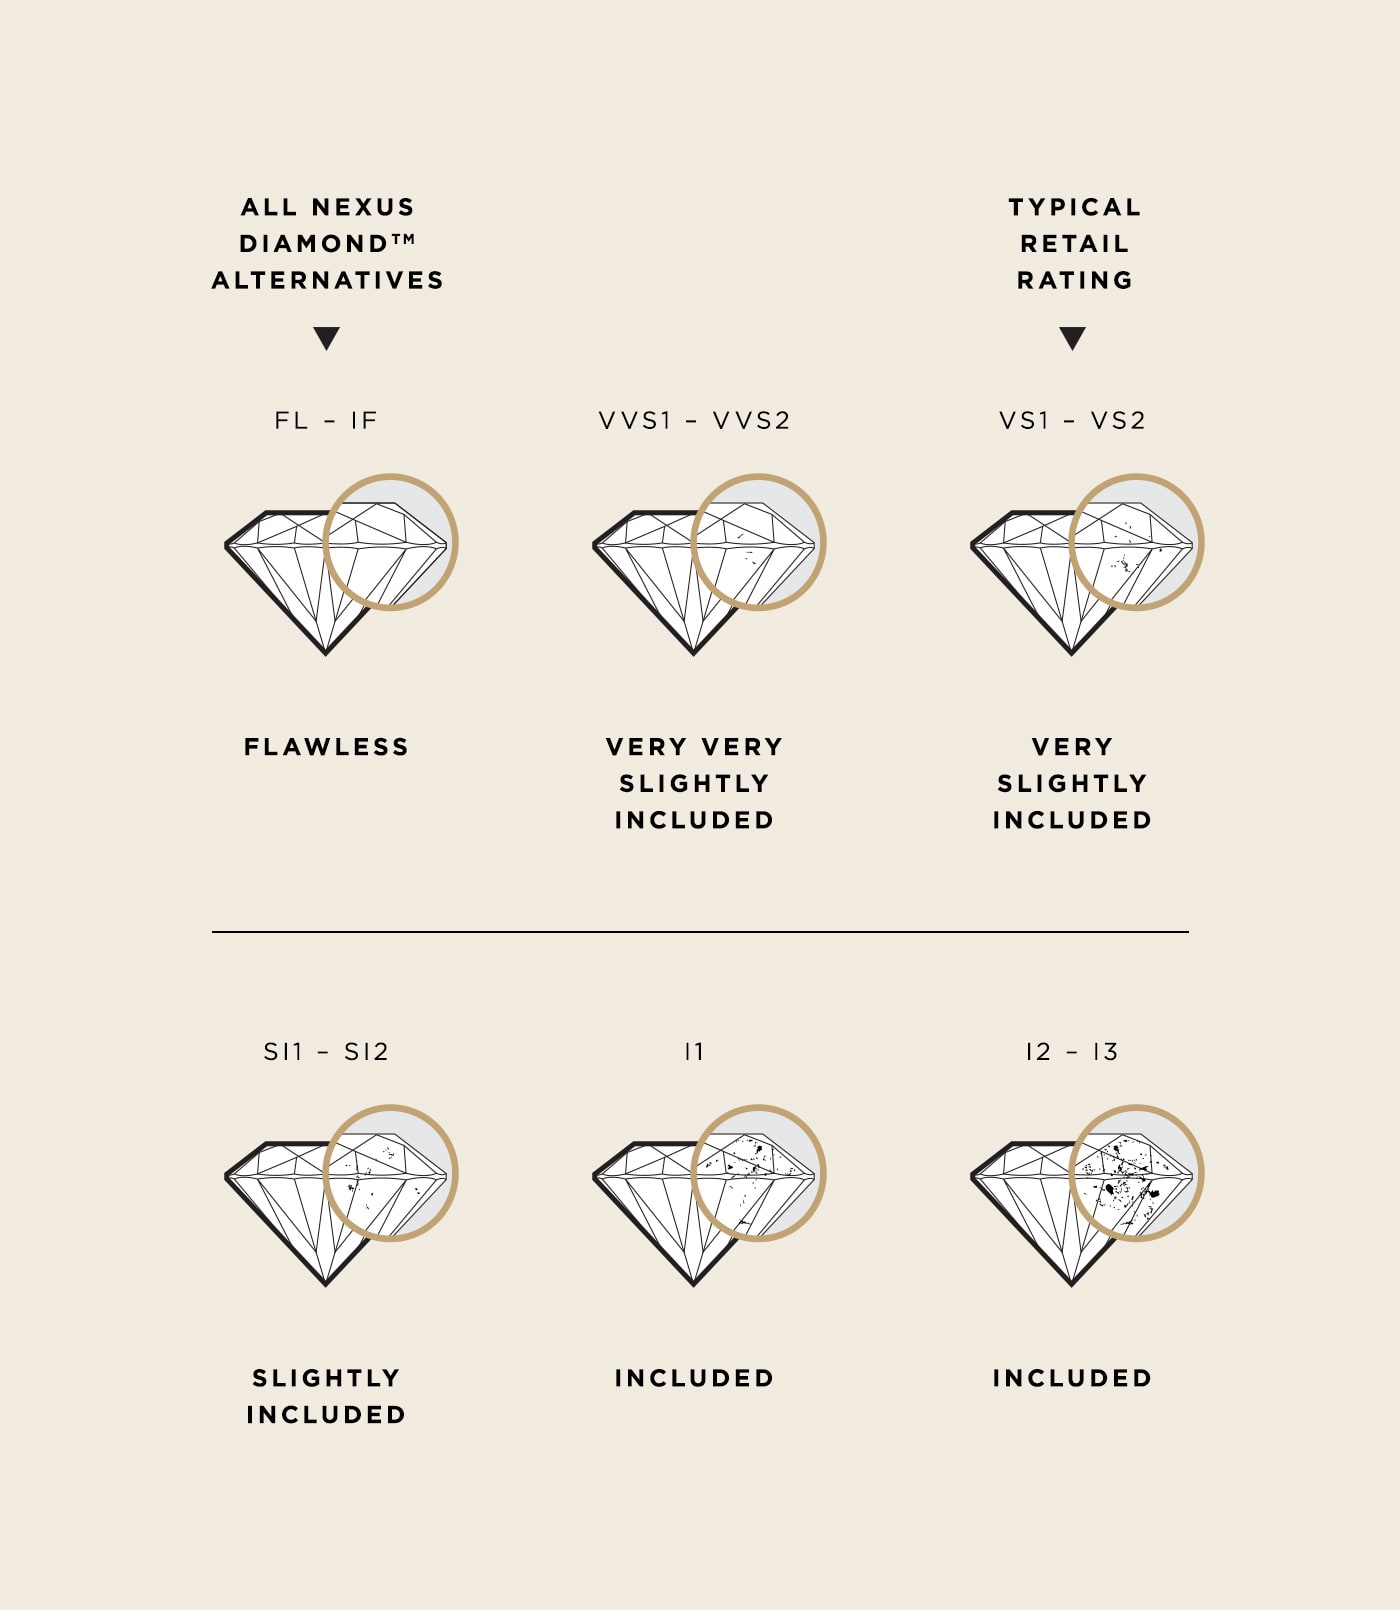 Graphic showing how more inclusions show the lower the diamond grade is.